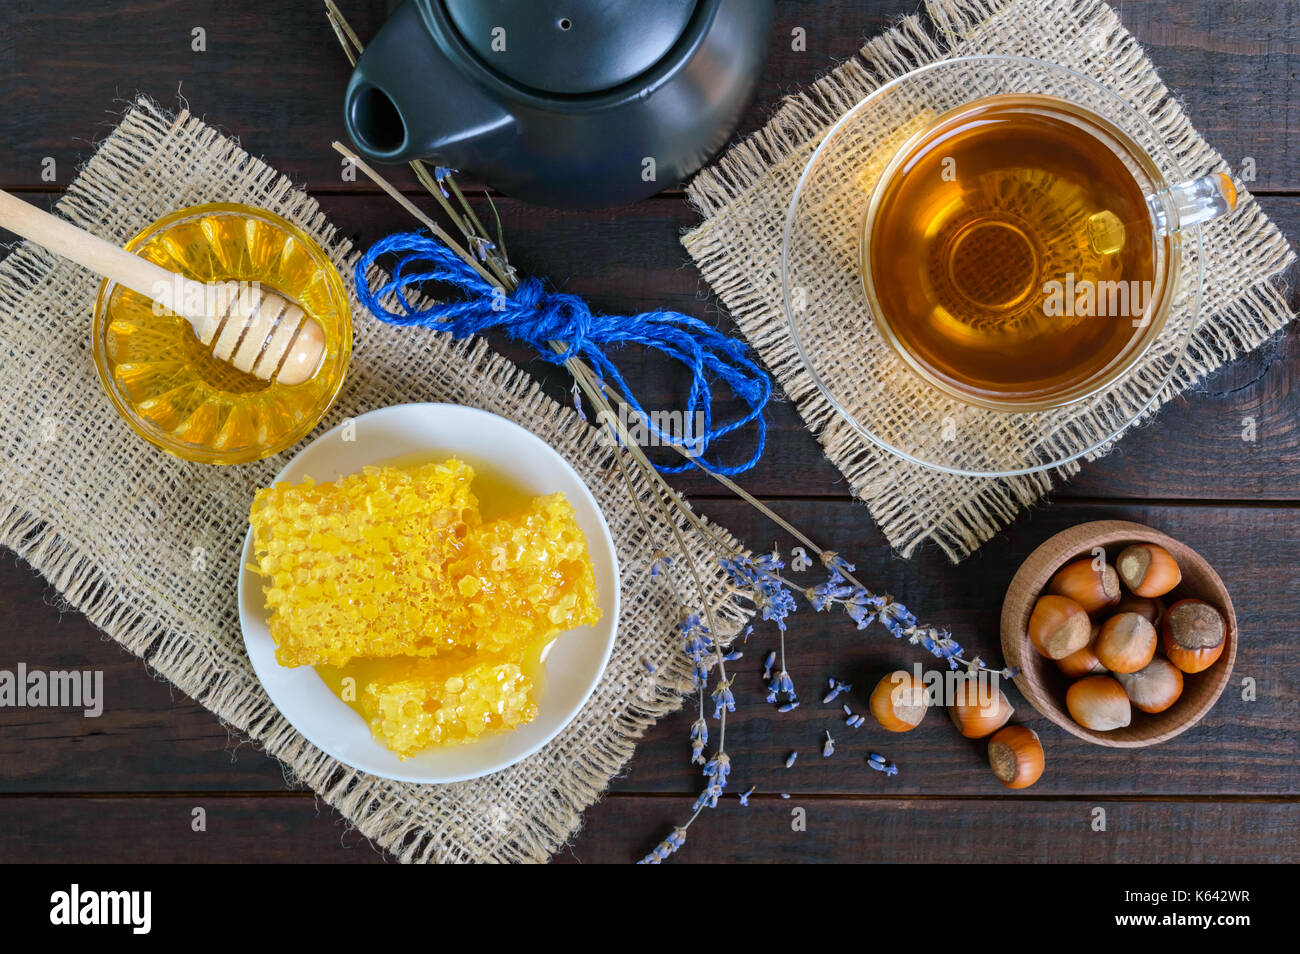 A cup of herbal tea, honey, honeycomb, hazelnuts on a dark wooden background. Healthy foods. Proper nutrition. Stock Photo